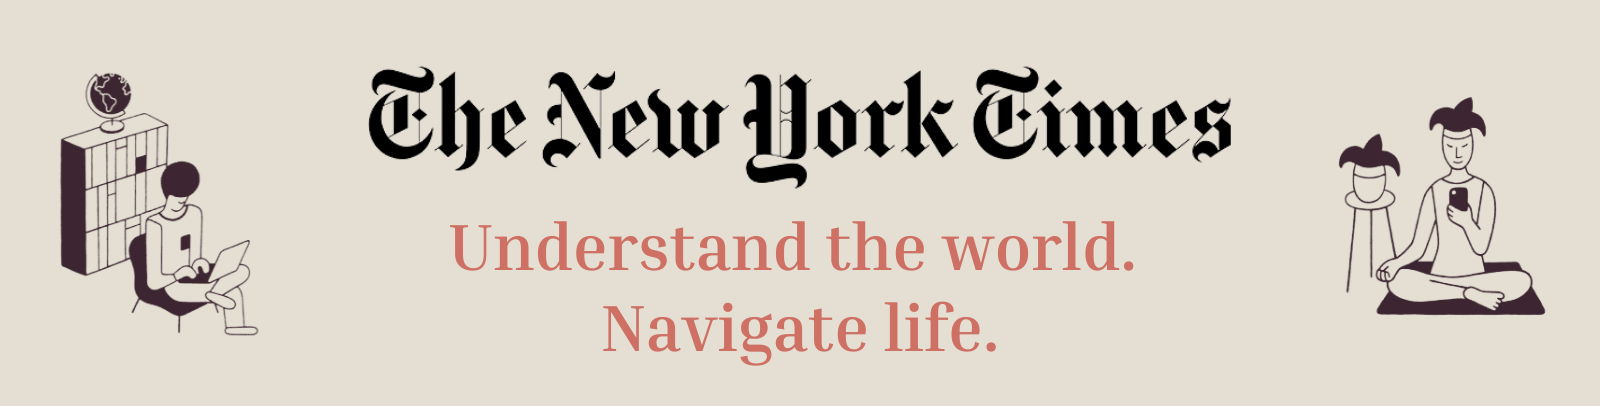 The New York Times logo centered above the text 